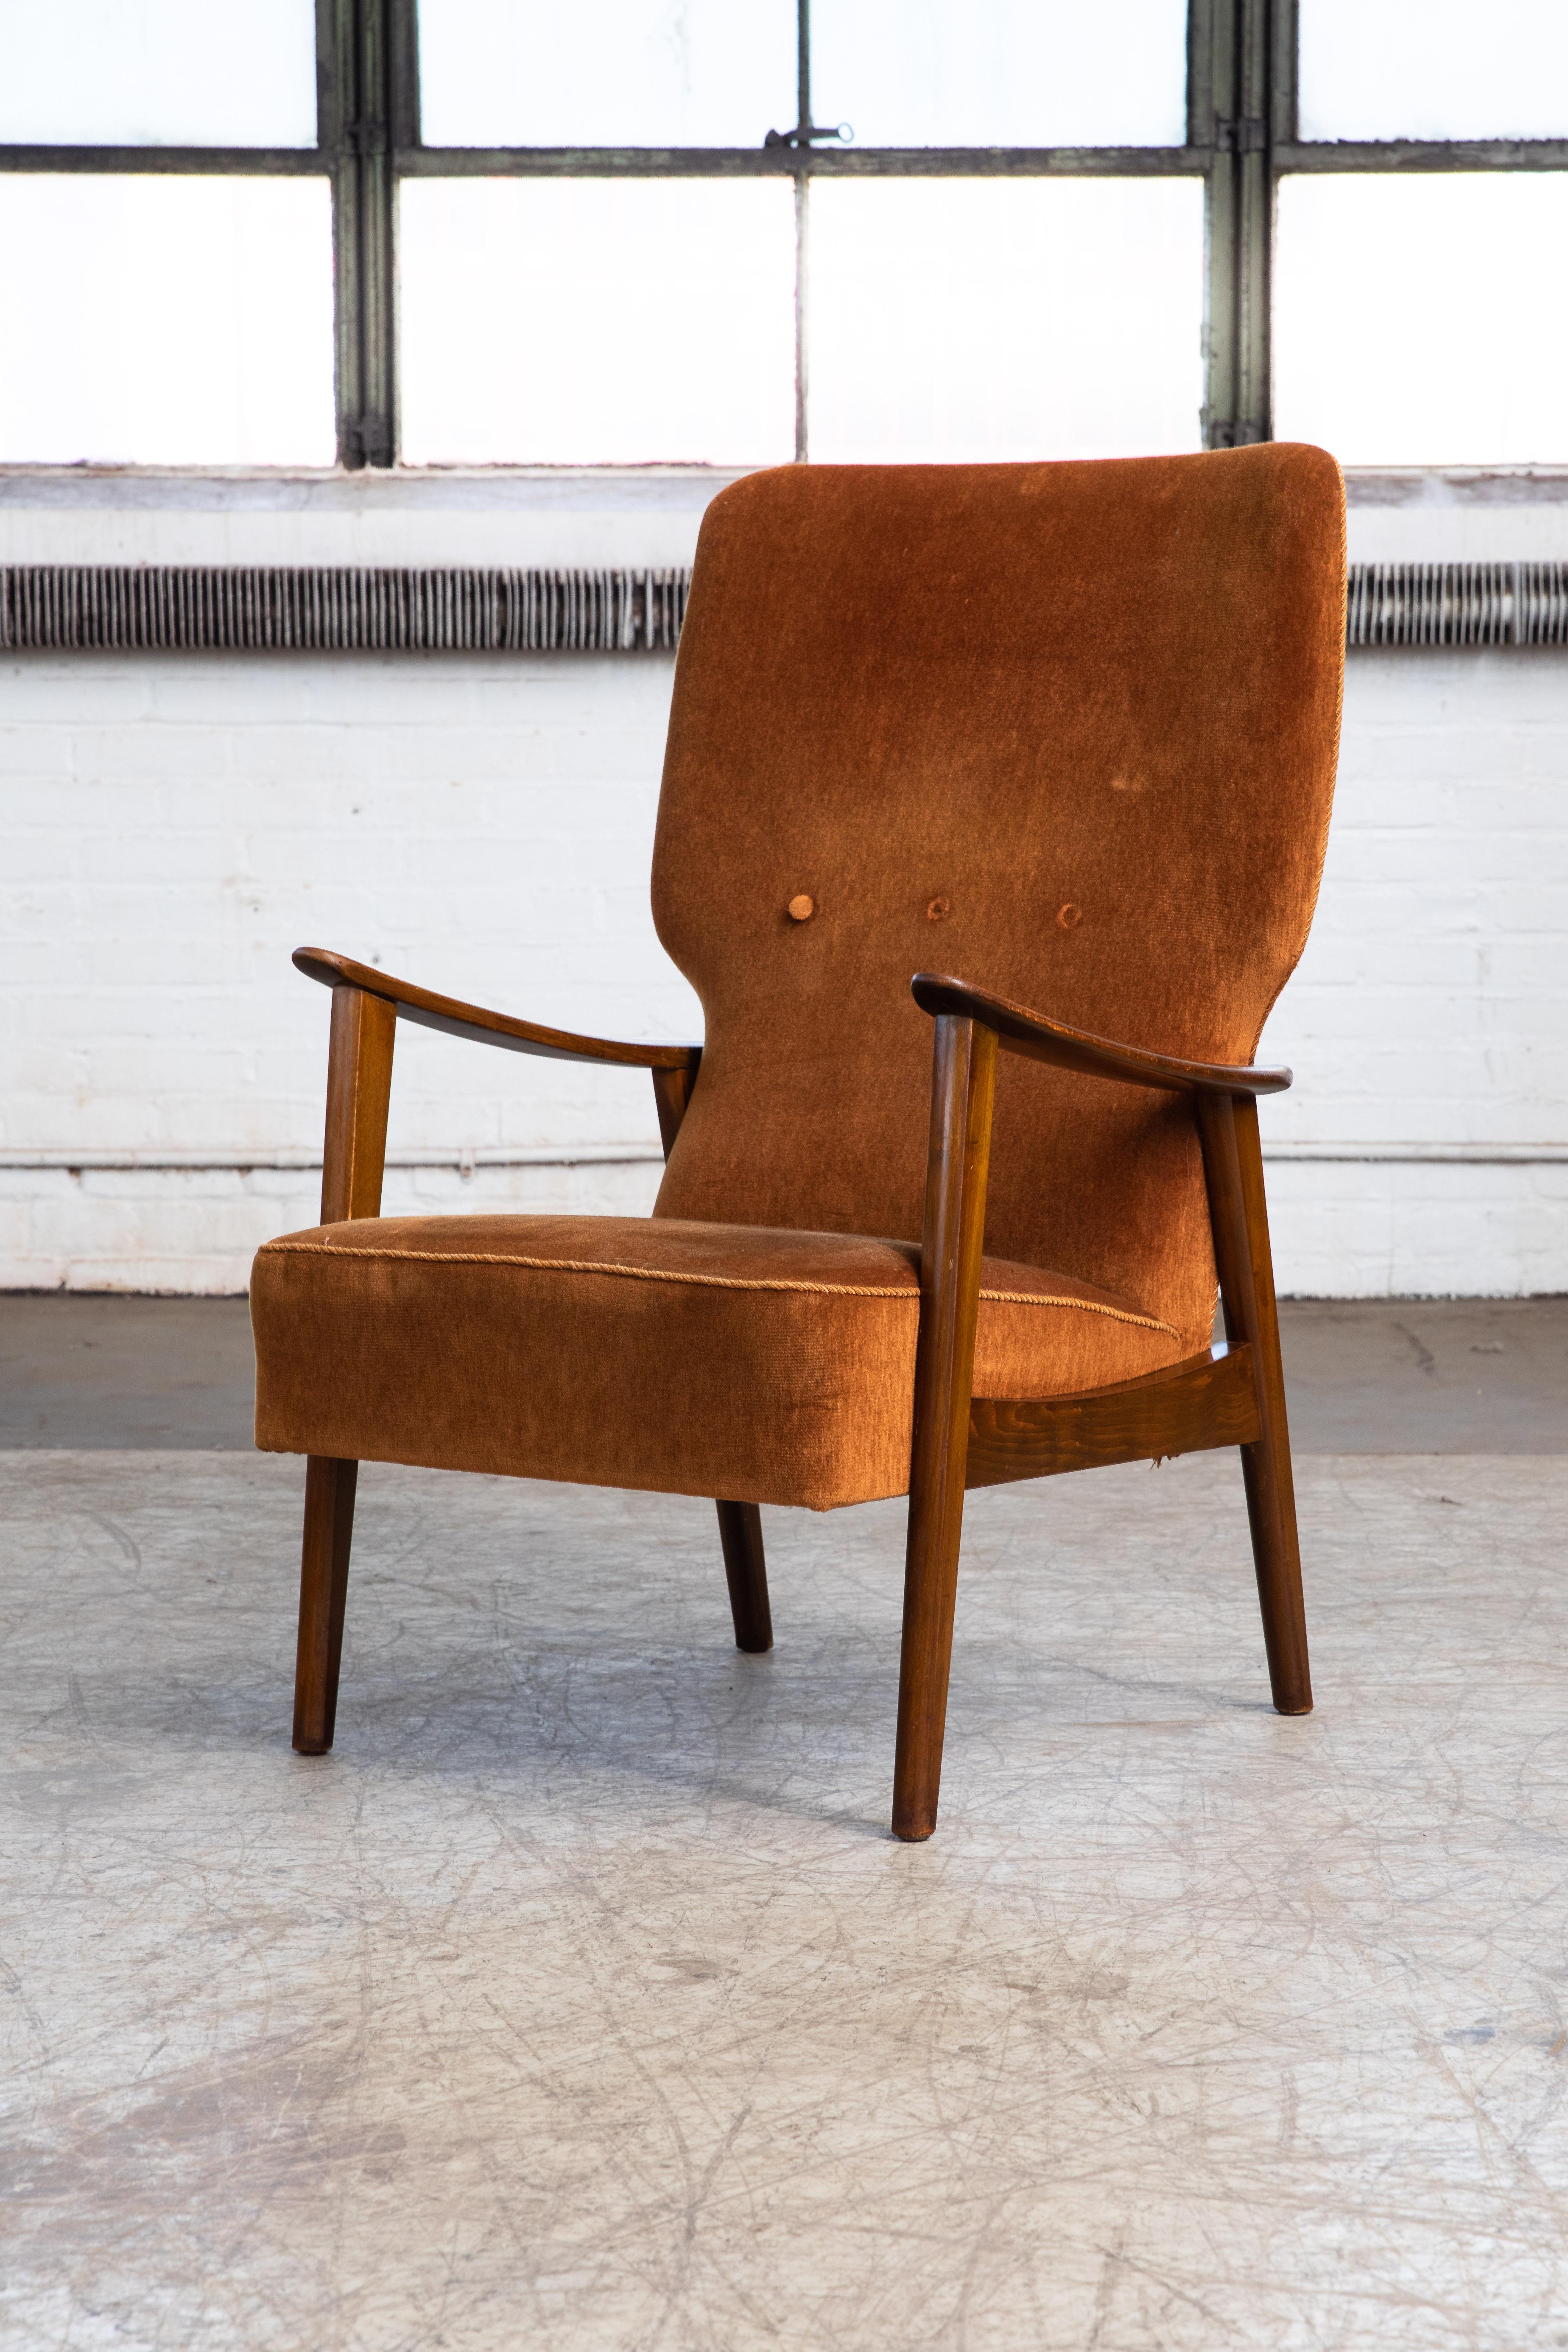 Stylish 1950's easy chair by Fritz Hansen from the early 1950's. Similar in style to some of hans Wegner's designs and also reminiscent of some of Arne Vodder's typical designs with the slight curvature to the armrests. Made from solid oak stained